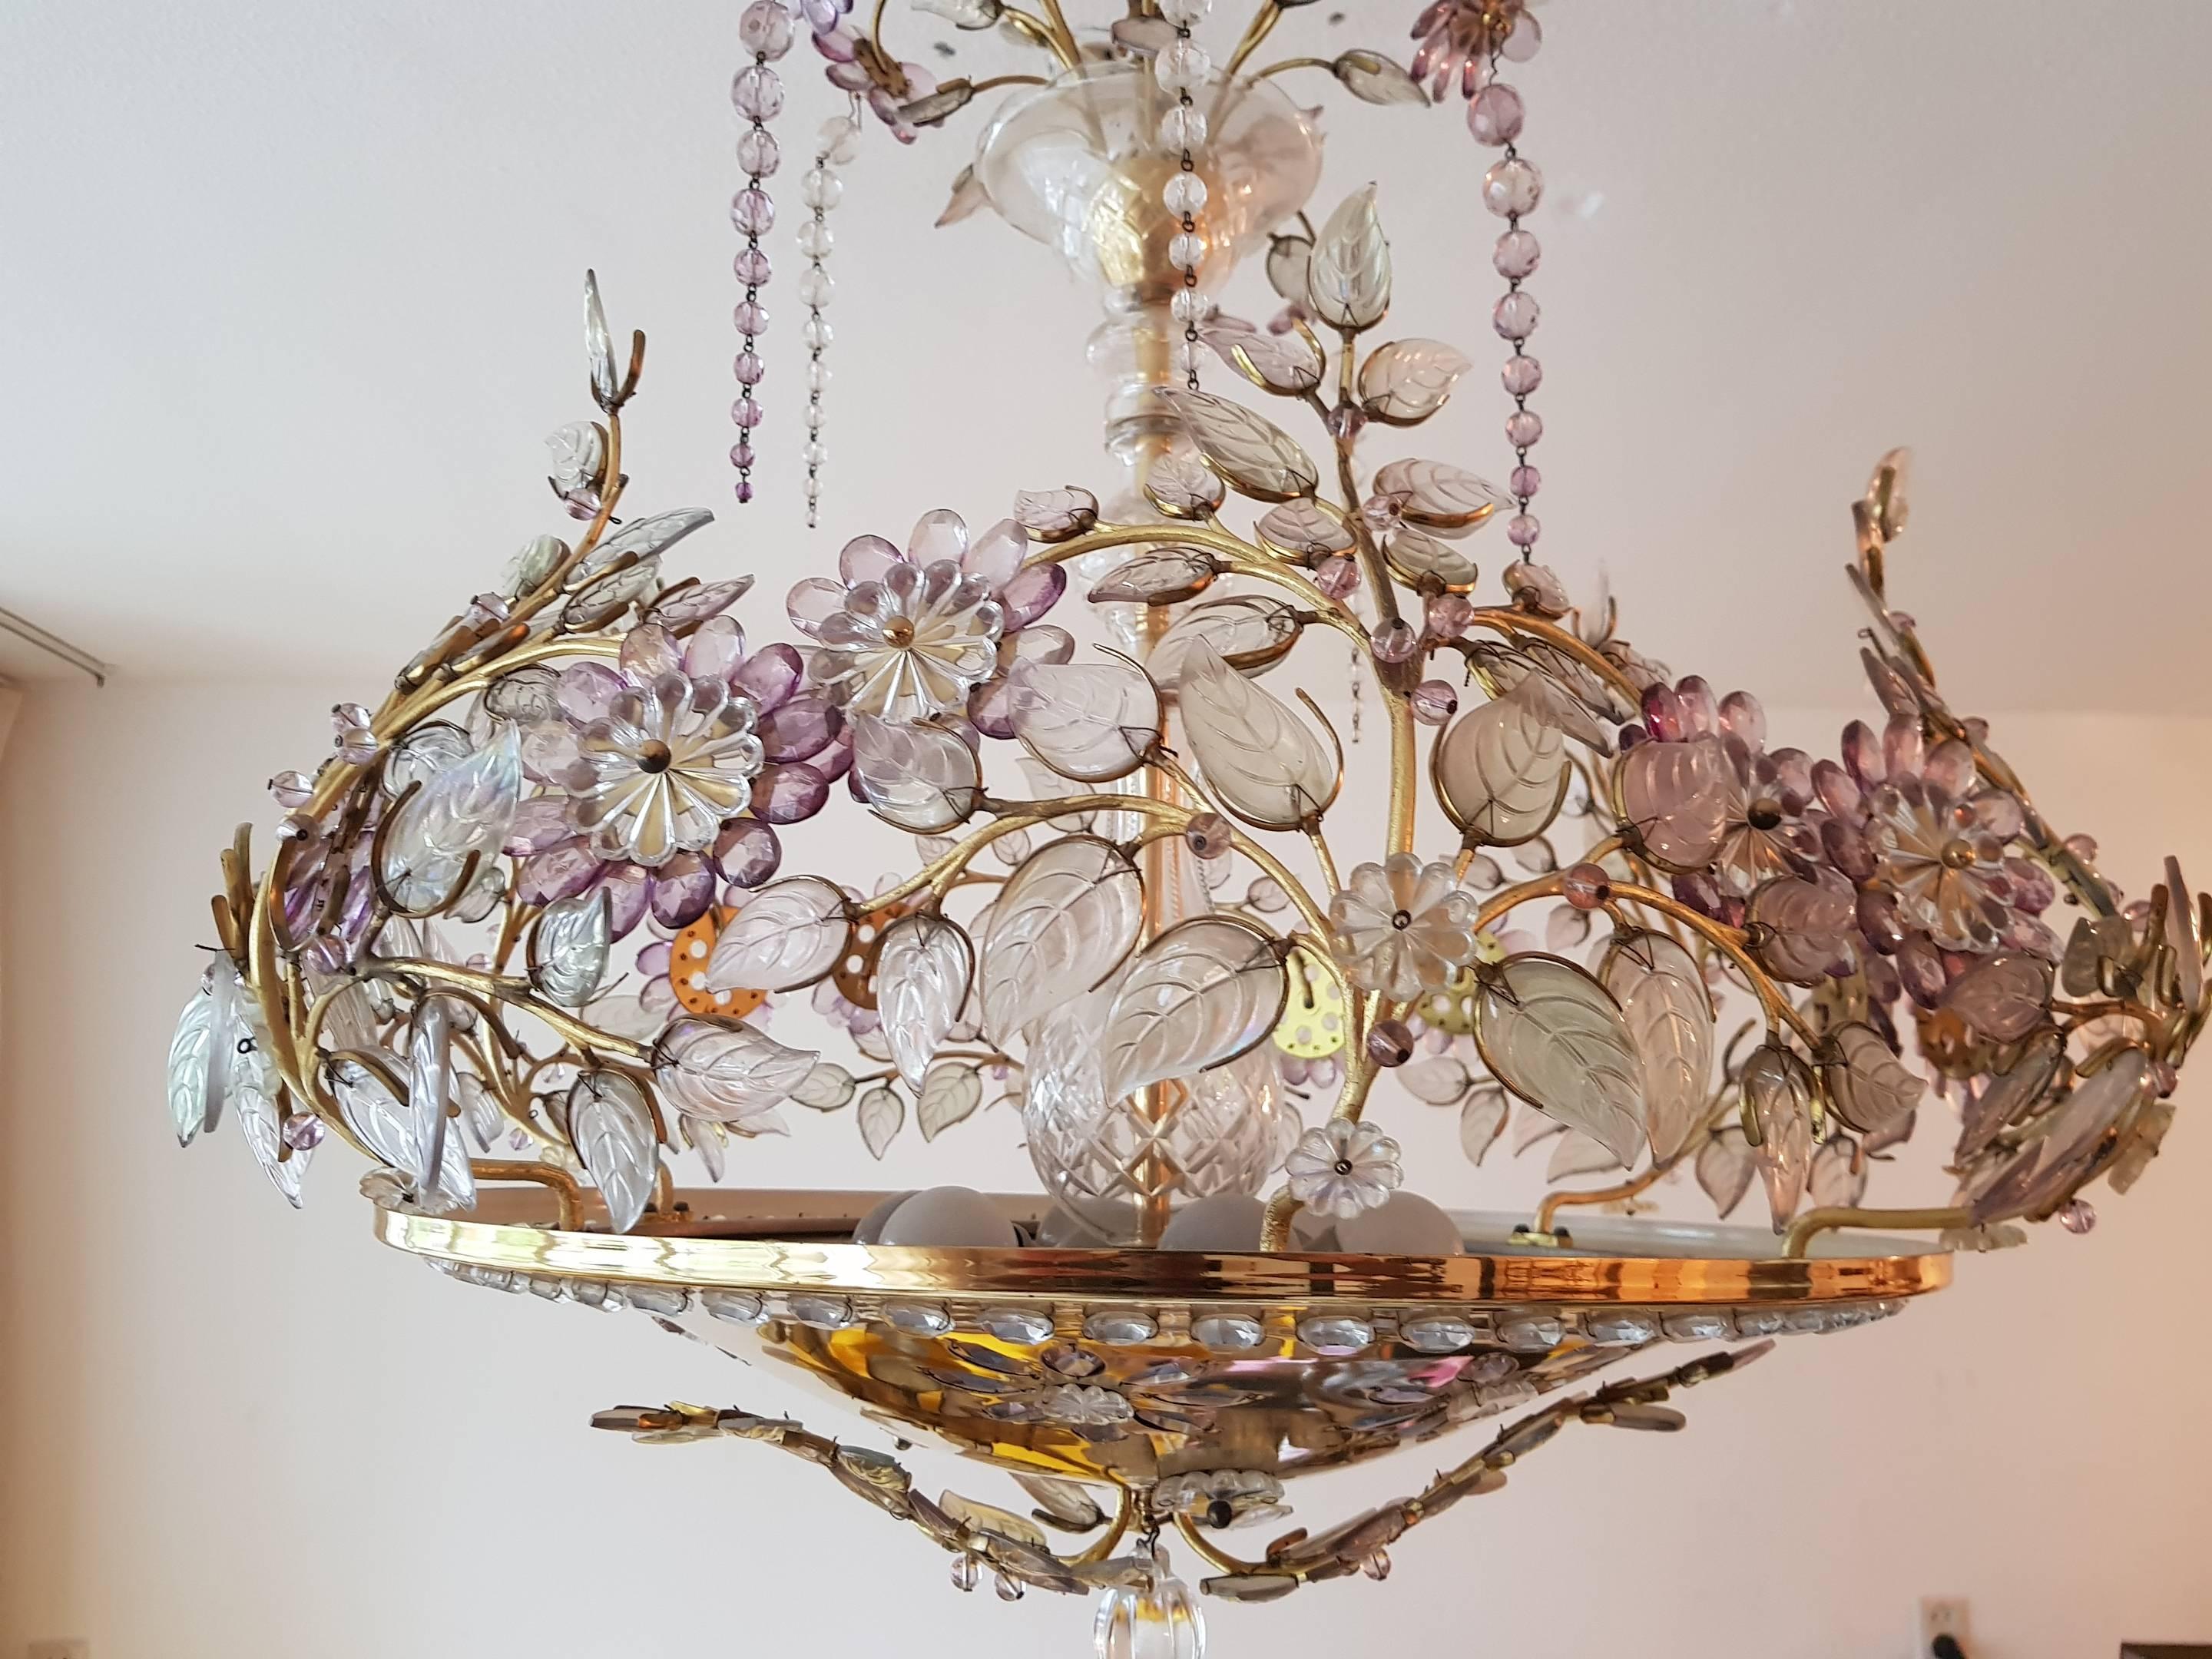 Beautiful Maison Bagues style chandelier made in France, 1950s.

Baguès was born in Auvergne circa 1840 and became famous internationally as a creator of art lighting. In the beginning it specialized in liturgical bronze and the company quickly